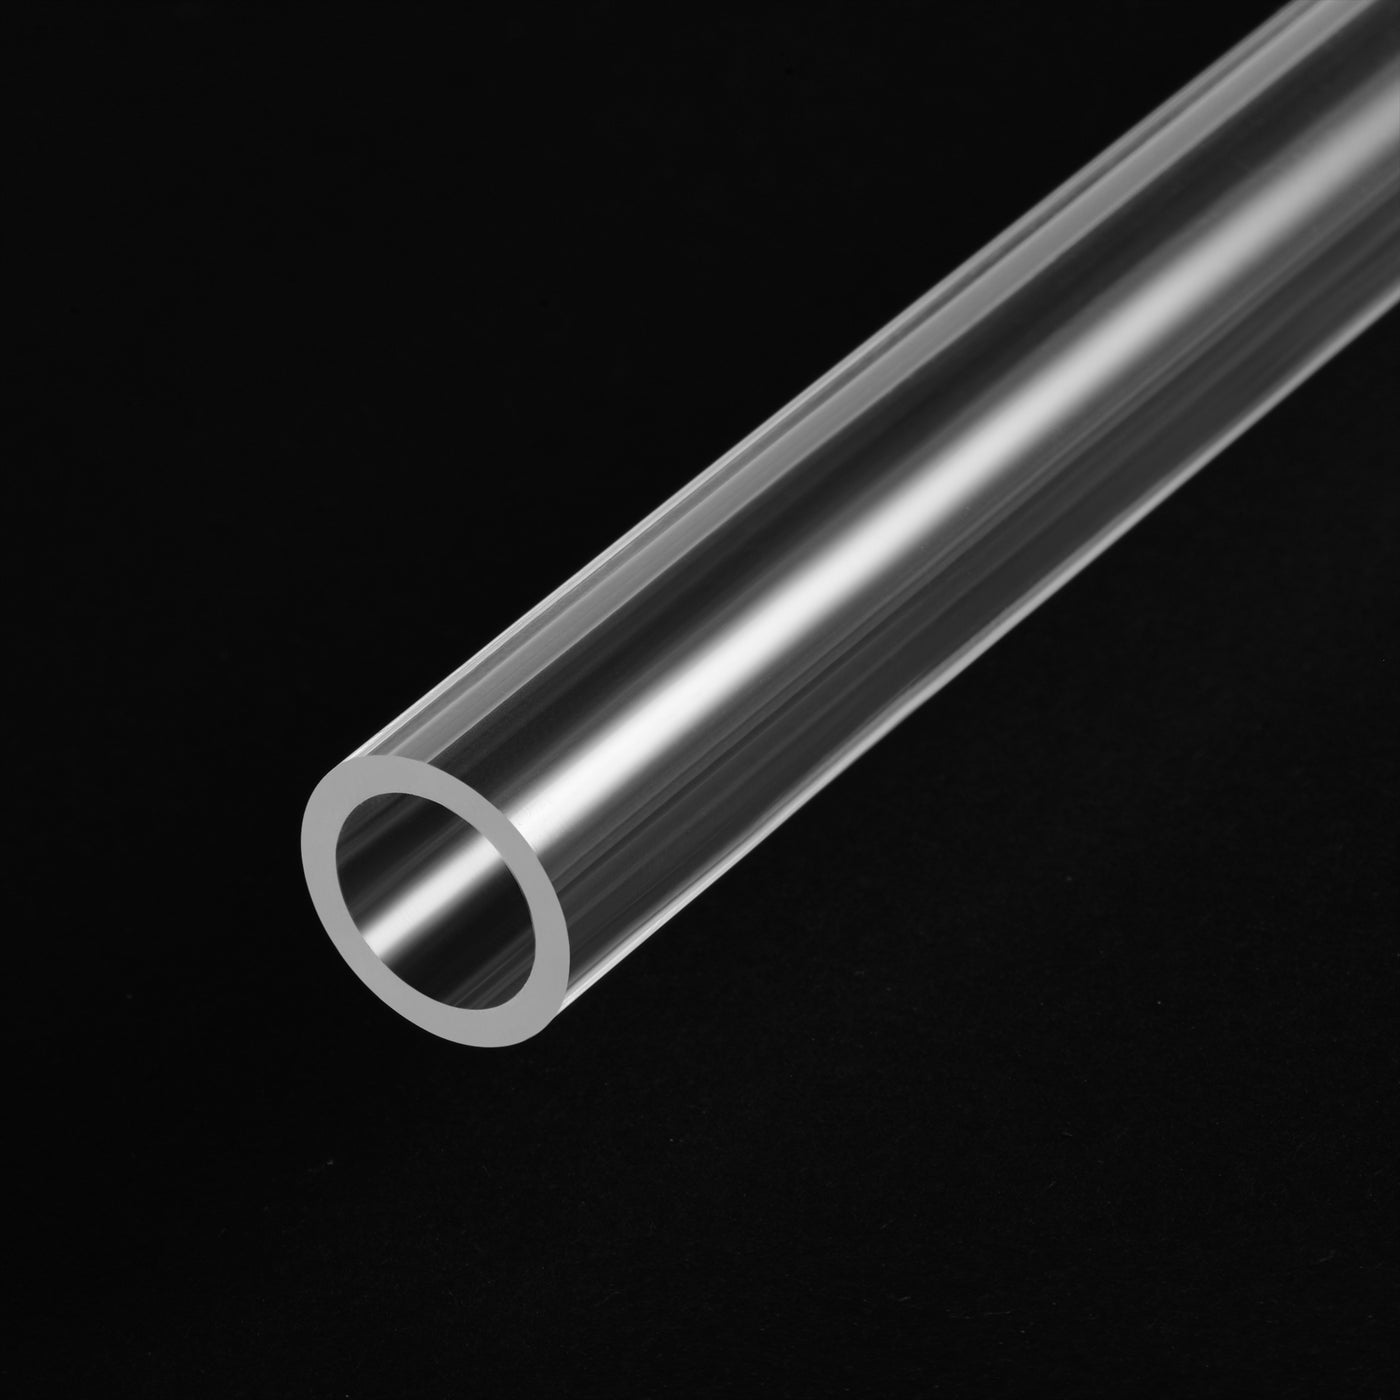 uxcell Uxcell Clear Rigid Acrylic Pipe 11mm ID x 15mm OD x 610mm, 2mm Wall Round Tube